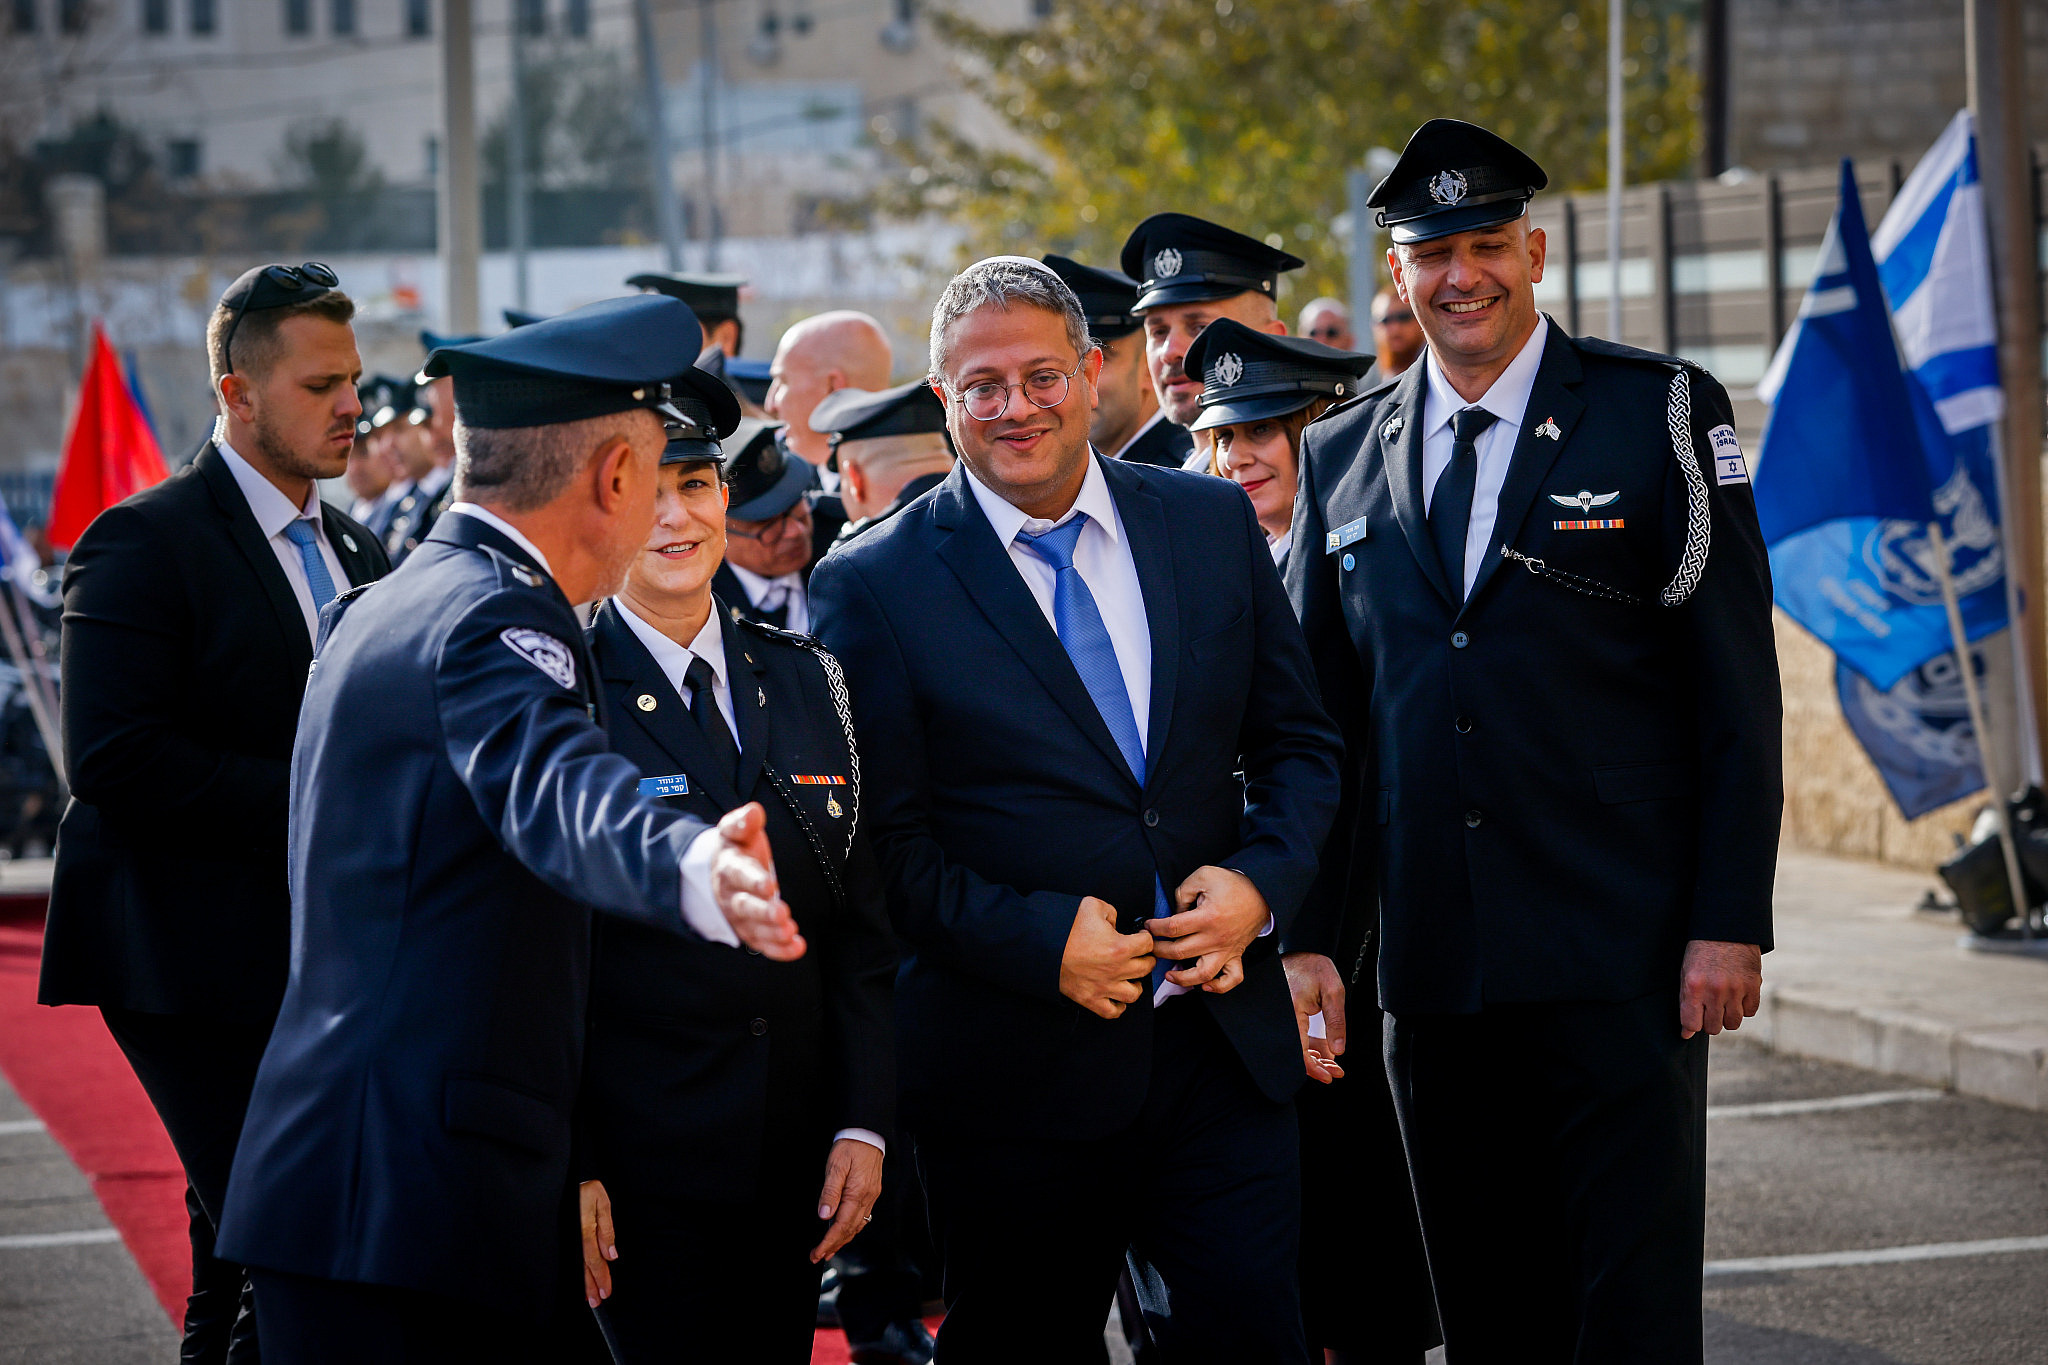 Minister of National Security Itamar Ben Gvir at a replacing ceremony of outgoing minister Omer Bar-Lev, in Jerusalem, January 1, 2023. (Olivier Fitoussi/Flash90)